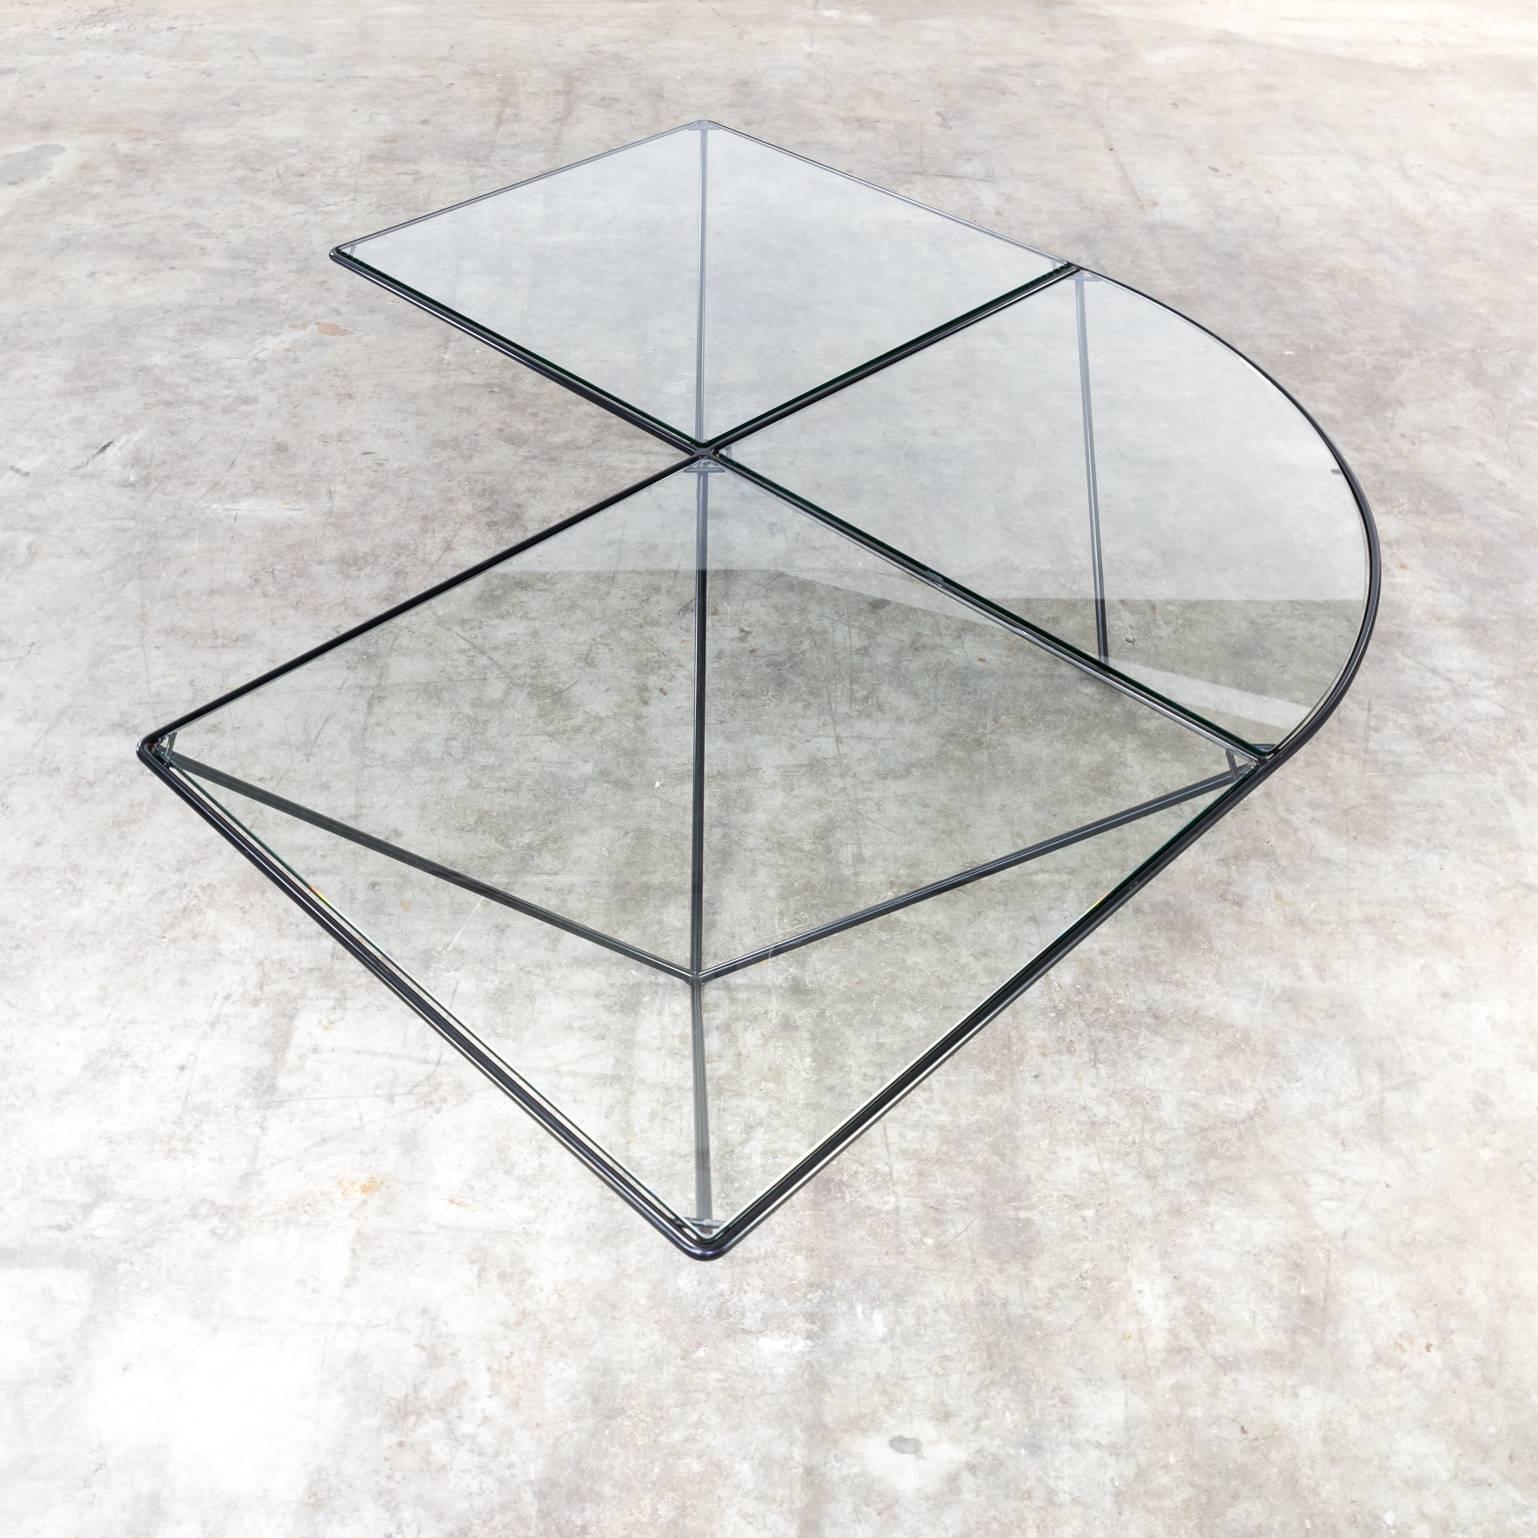 Glass Corner Coffee Table, style of Paolo Piva In Good Condition For Sale In Amstelveen, Noord